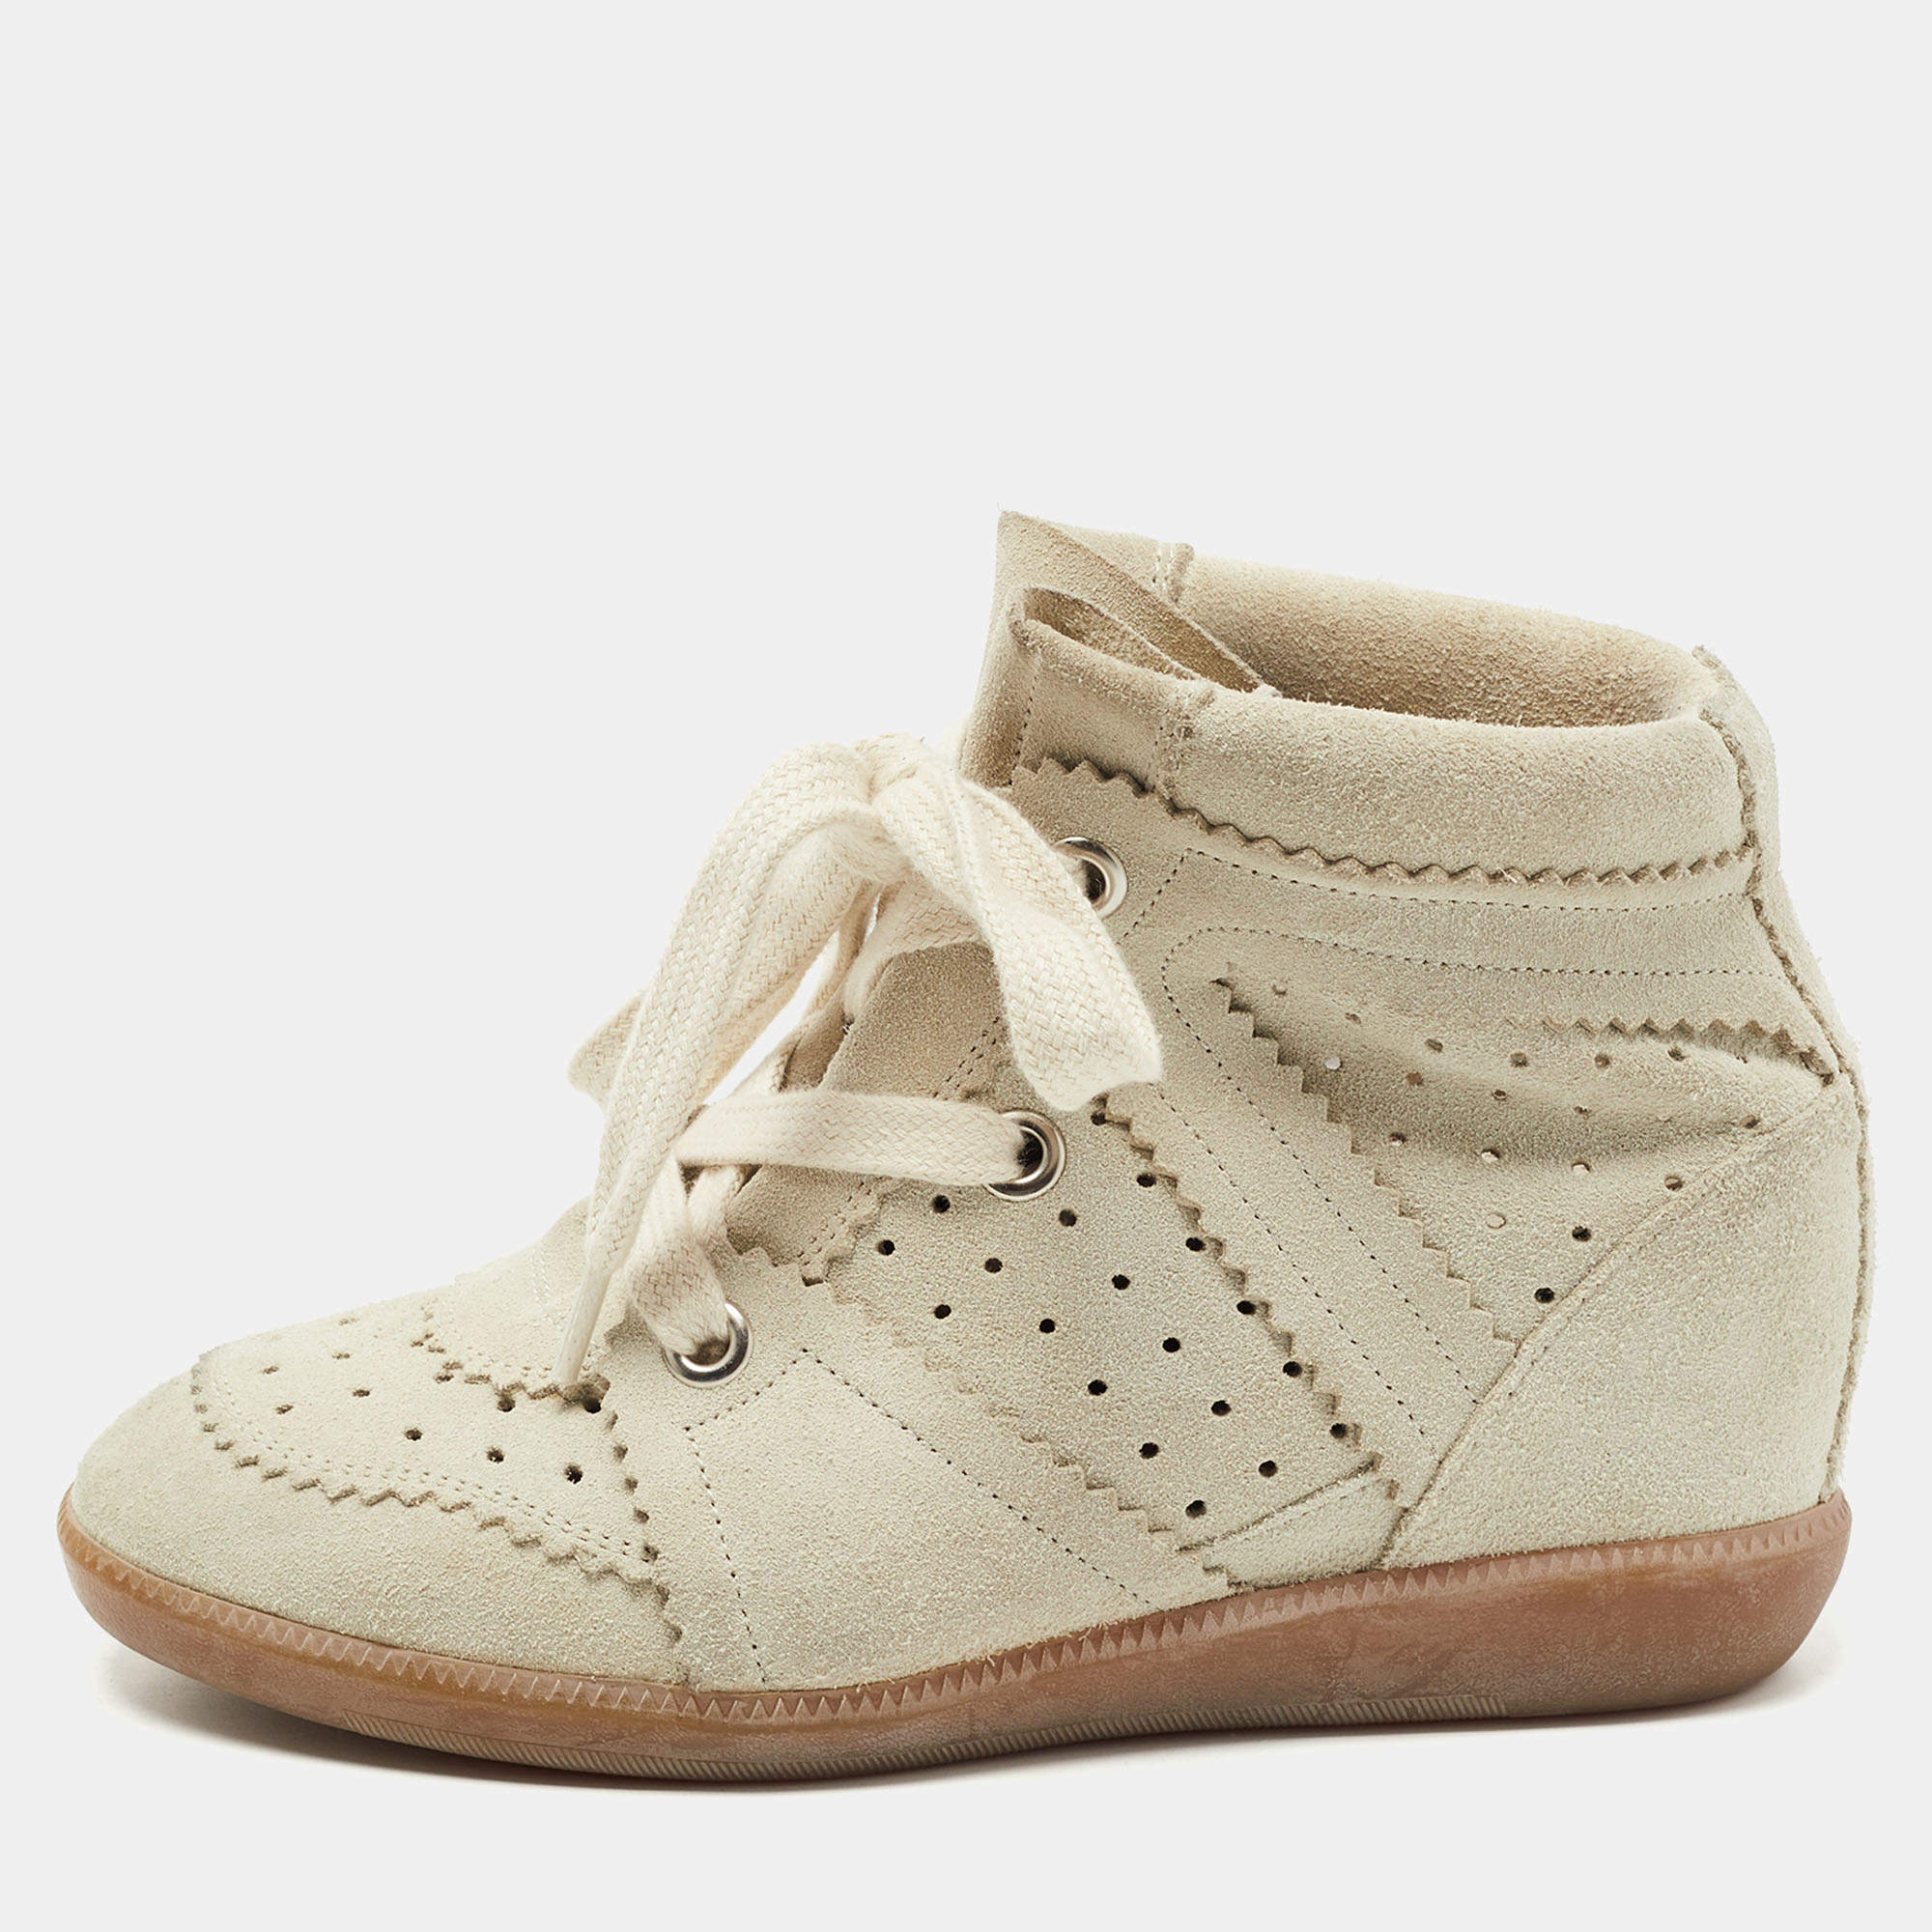 Plenaire sessie voldoende Morse code Isabel Marant Grey Suede Bobby Wedge High Top Sneakers Size 36 Isabel Marant  | TLC